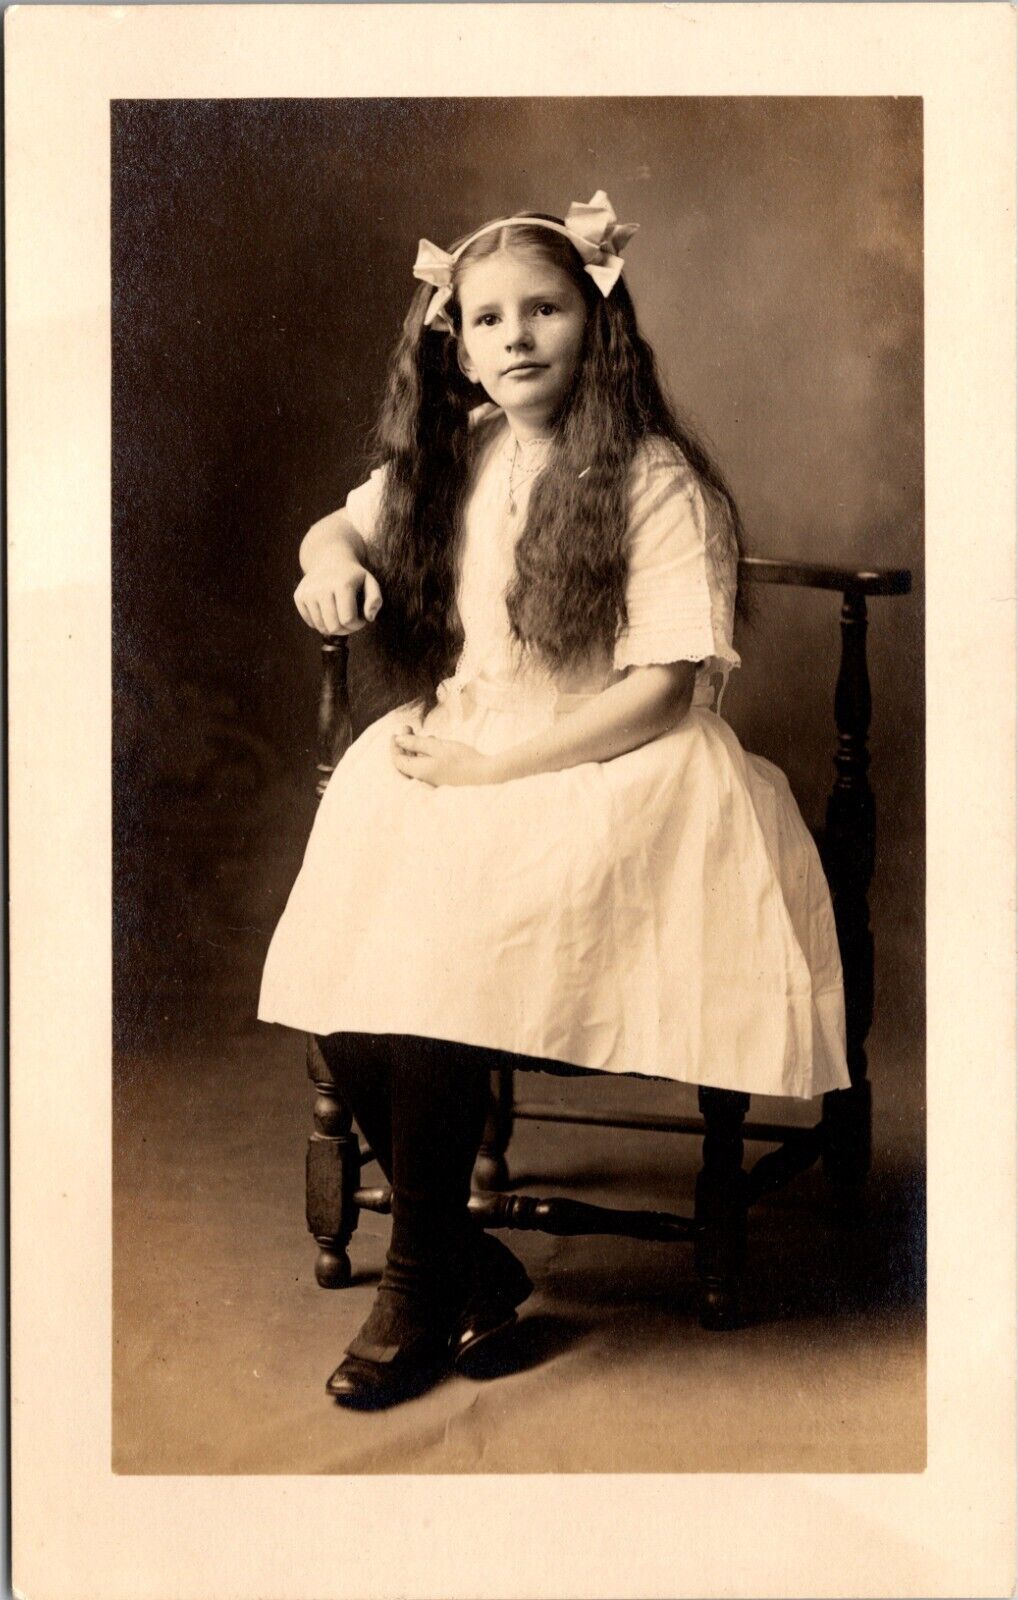 PORTRAIT OF A CUTE LITTLE GIRL : SEVEN YEARS OLD : RPPC : (1913)